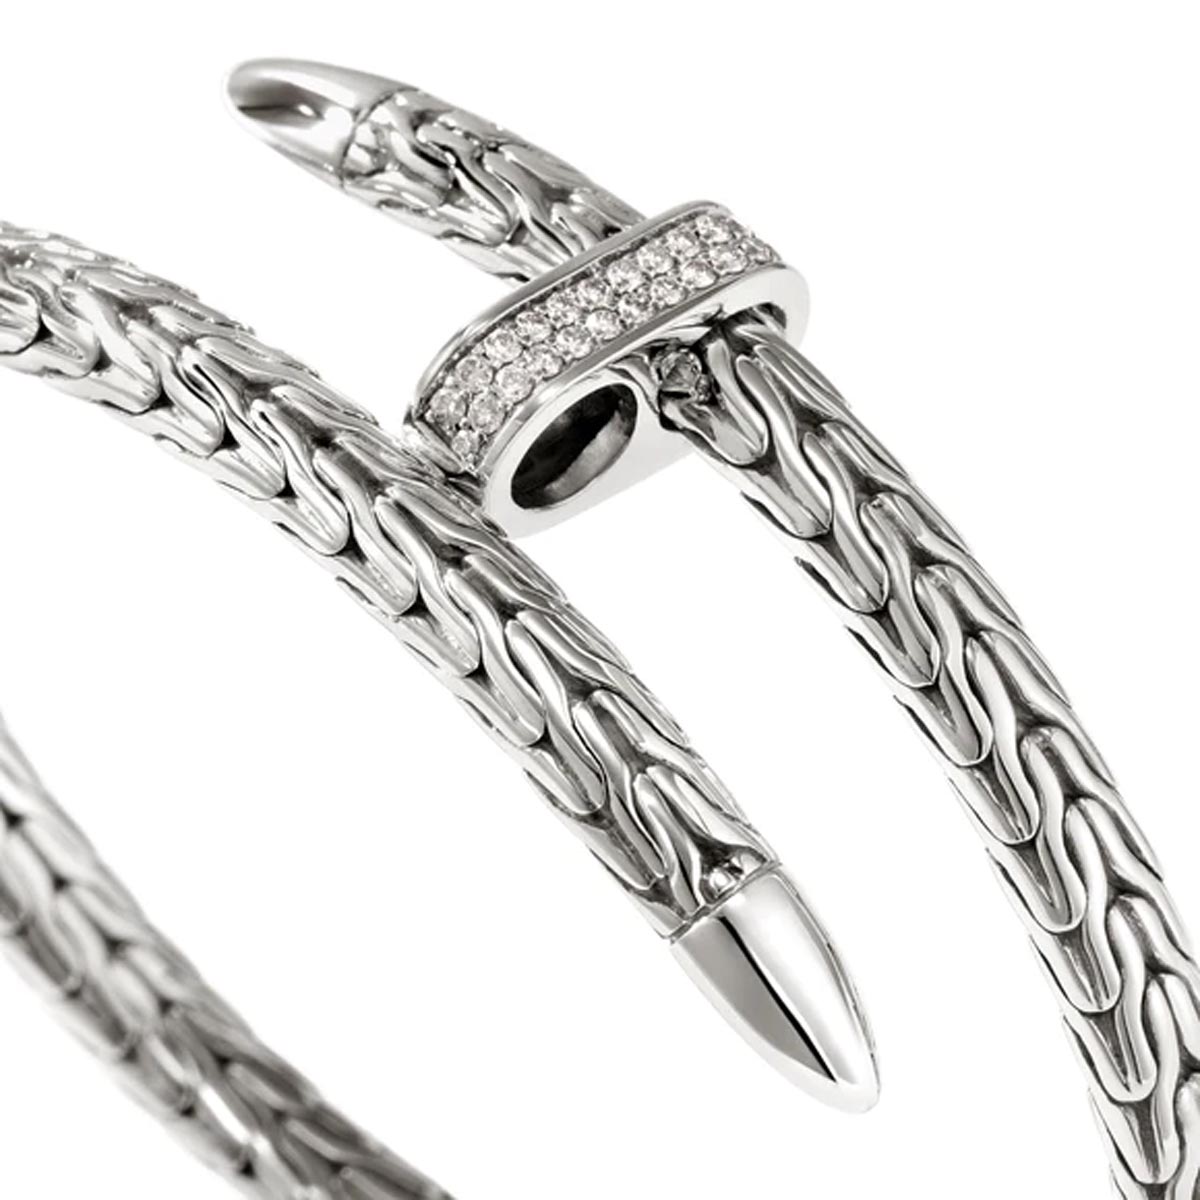 John Hardy Classic Chain Collection Bypass Bangle Bracelet in Sterling Silver with Diamonds (1/4ct tw)